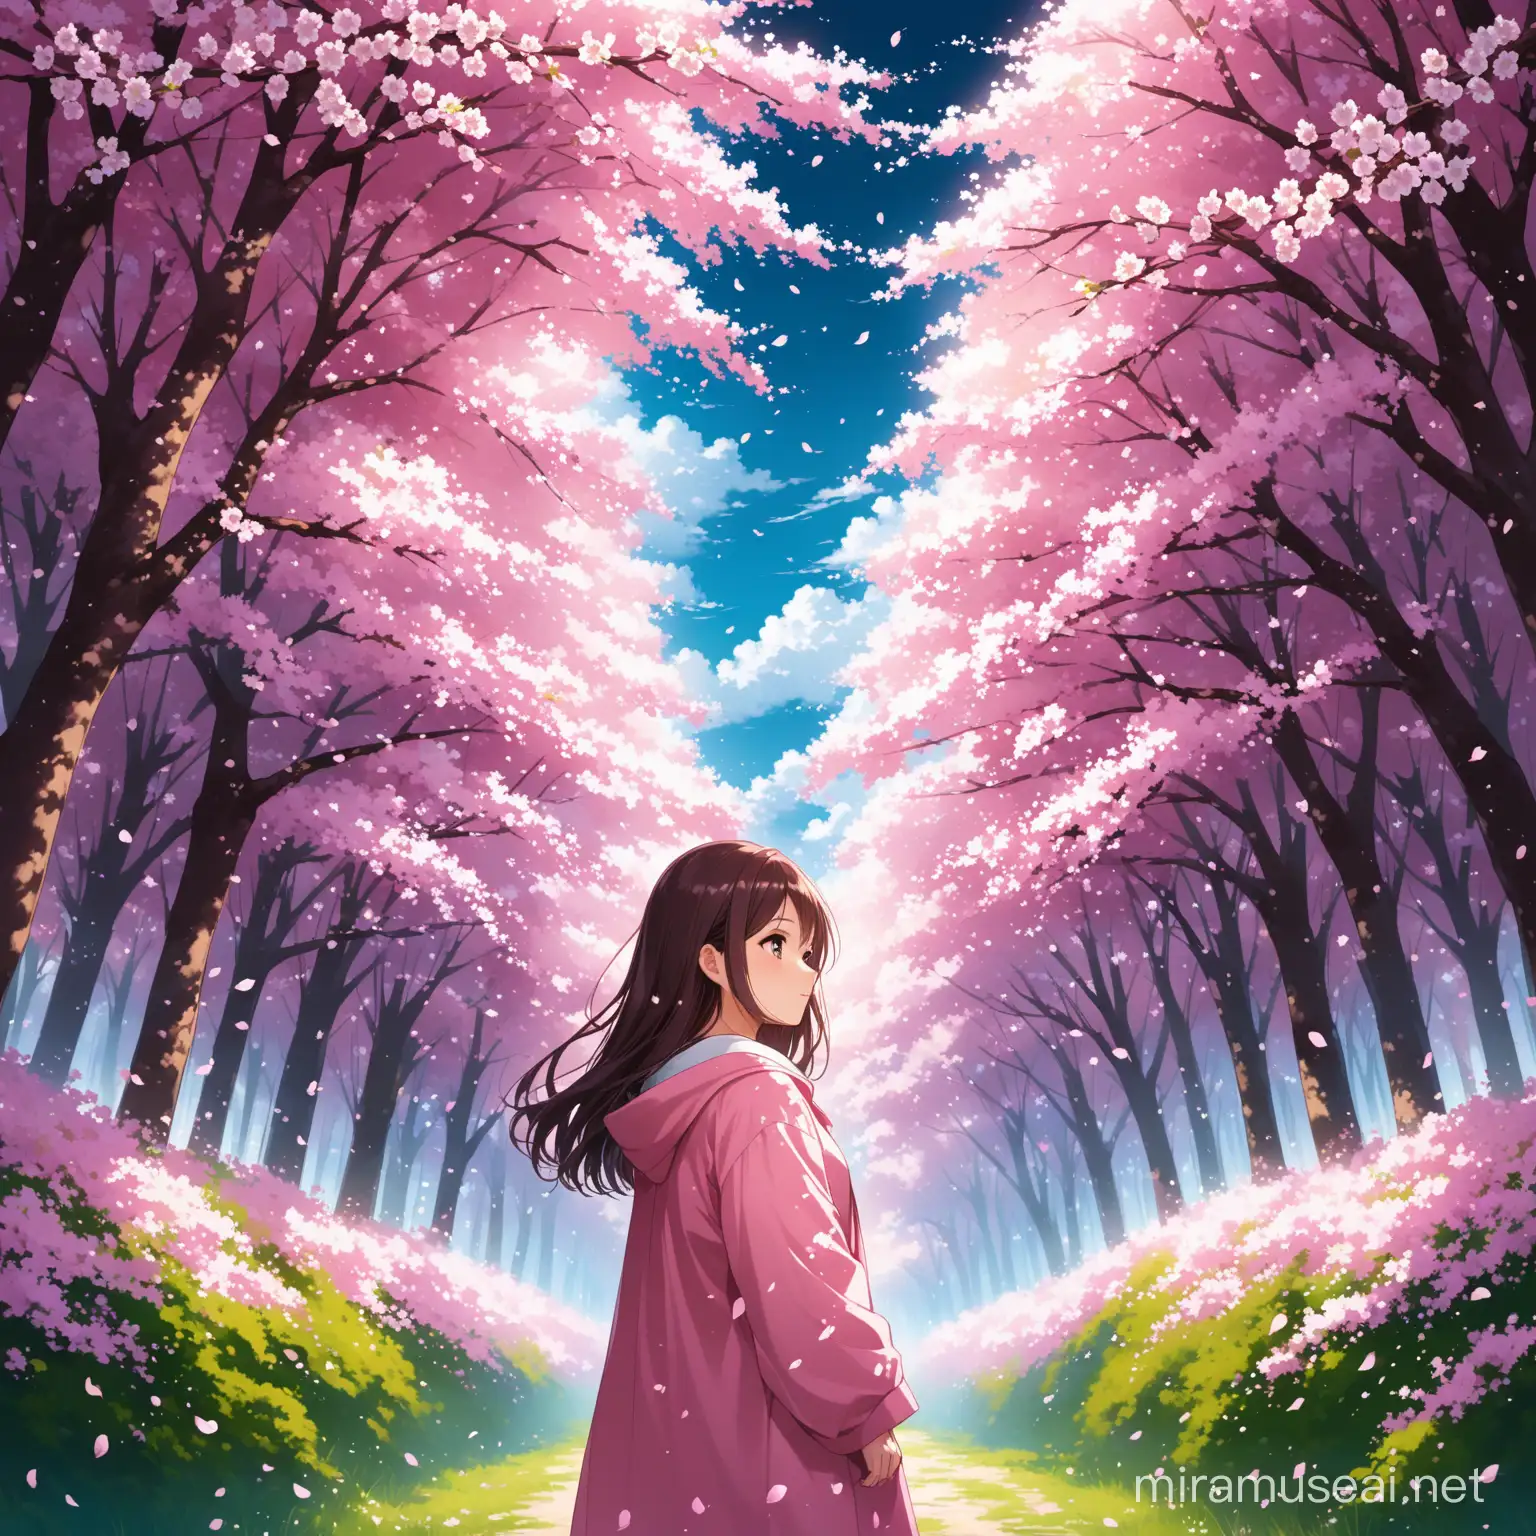 Girl in Blooming Cherry Blossom Forest Under Dark Clouds